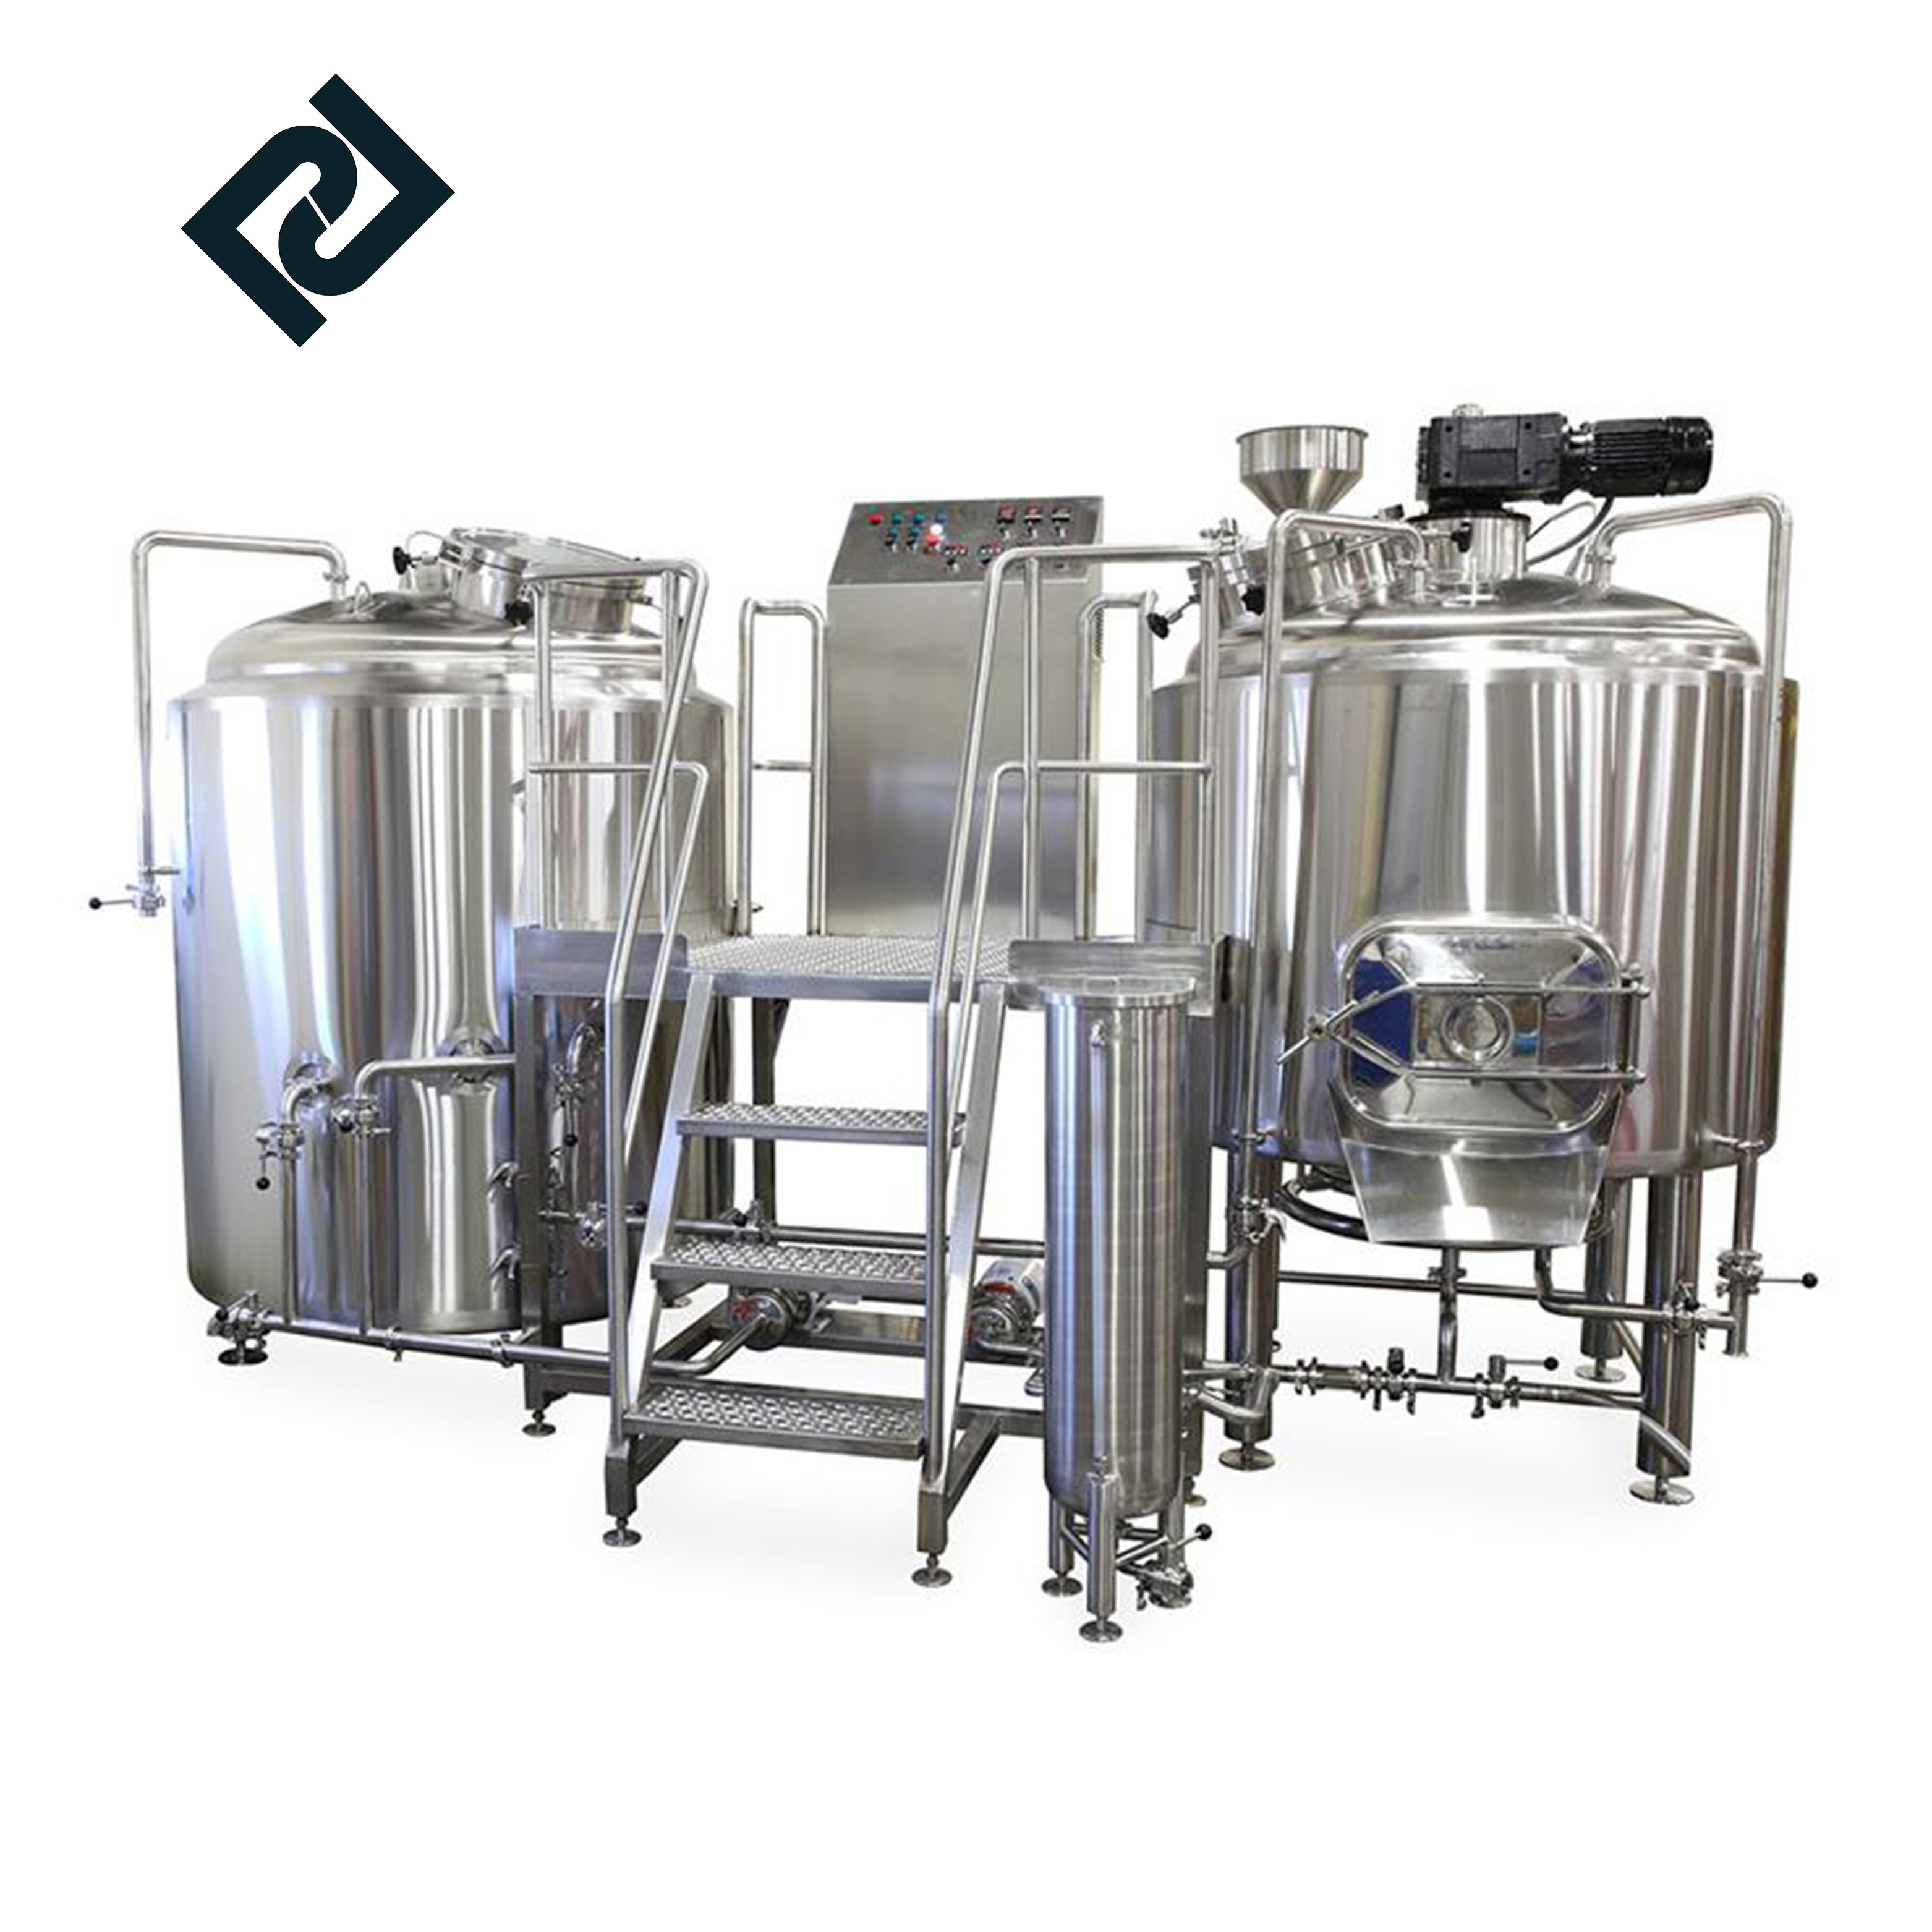 Good Wholesale Vendors Small Beer Brewery Equipment - 5bbl-15bbl craft beer making system craft beer brewing equipment for microbrewery equipment – Pijiang